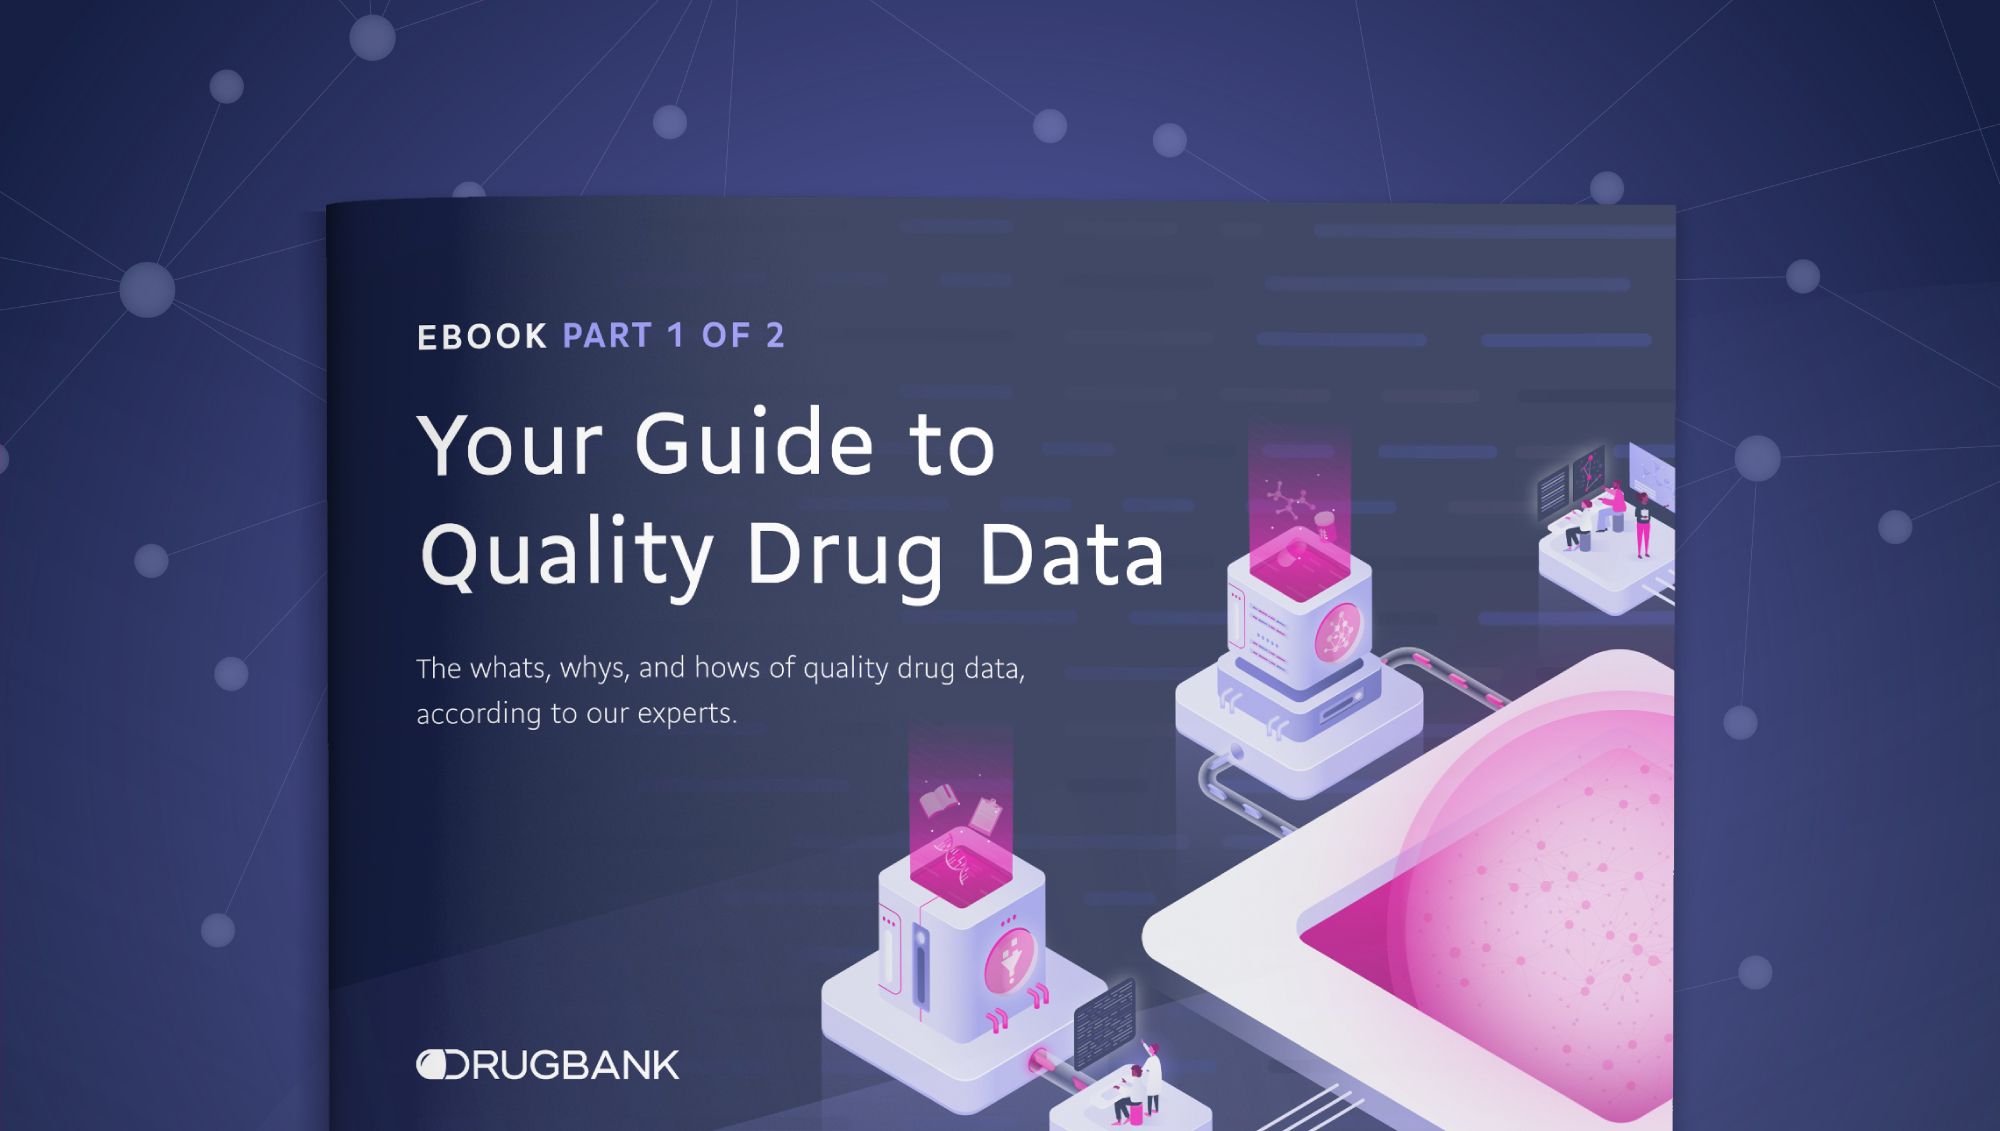 Your Guide to Quality Drug Data eBook. The whats, whys, and hows of quality drug data, according to Drugbank experts.